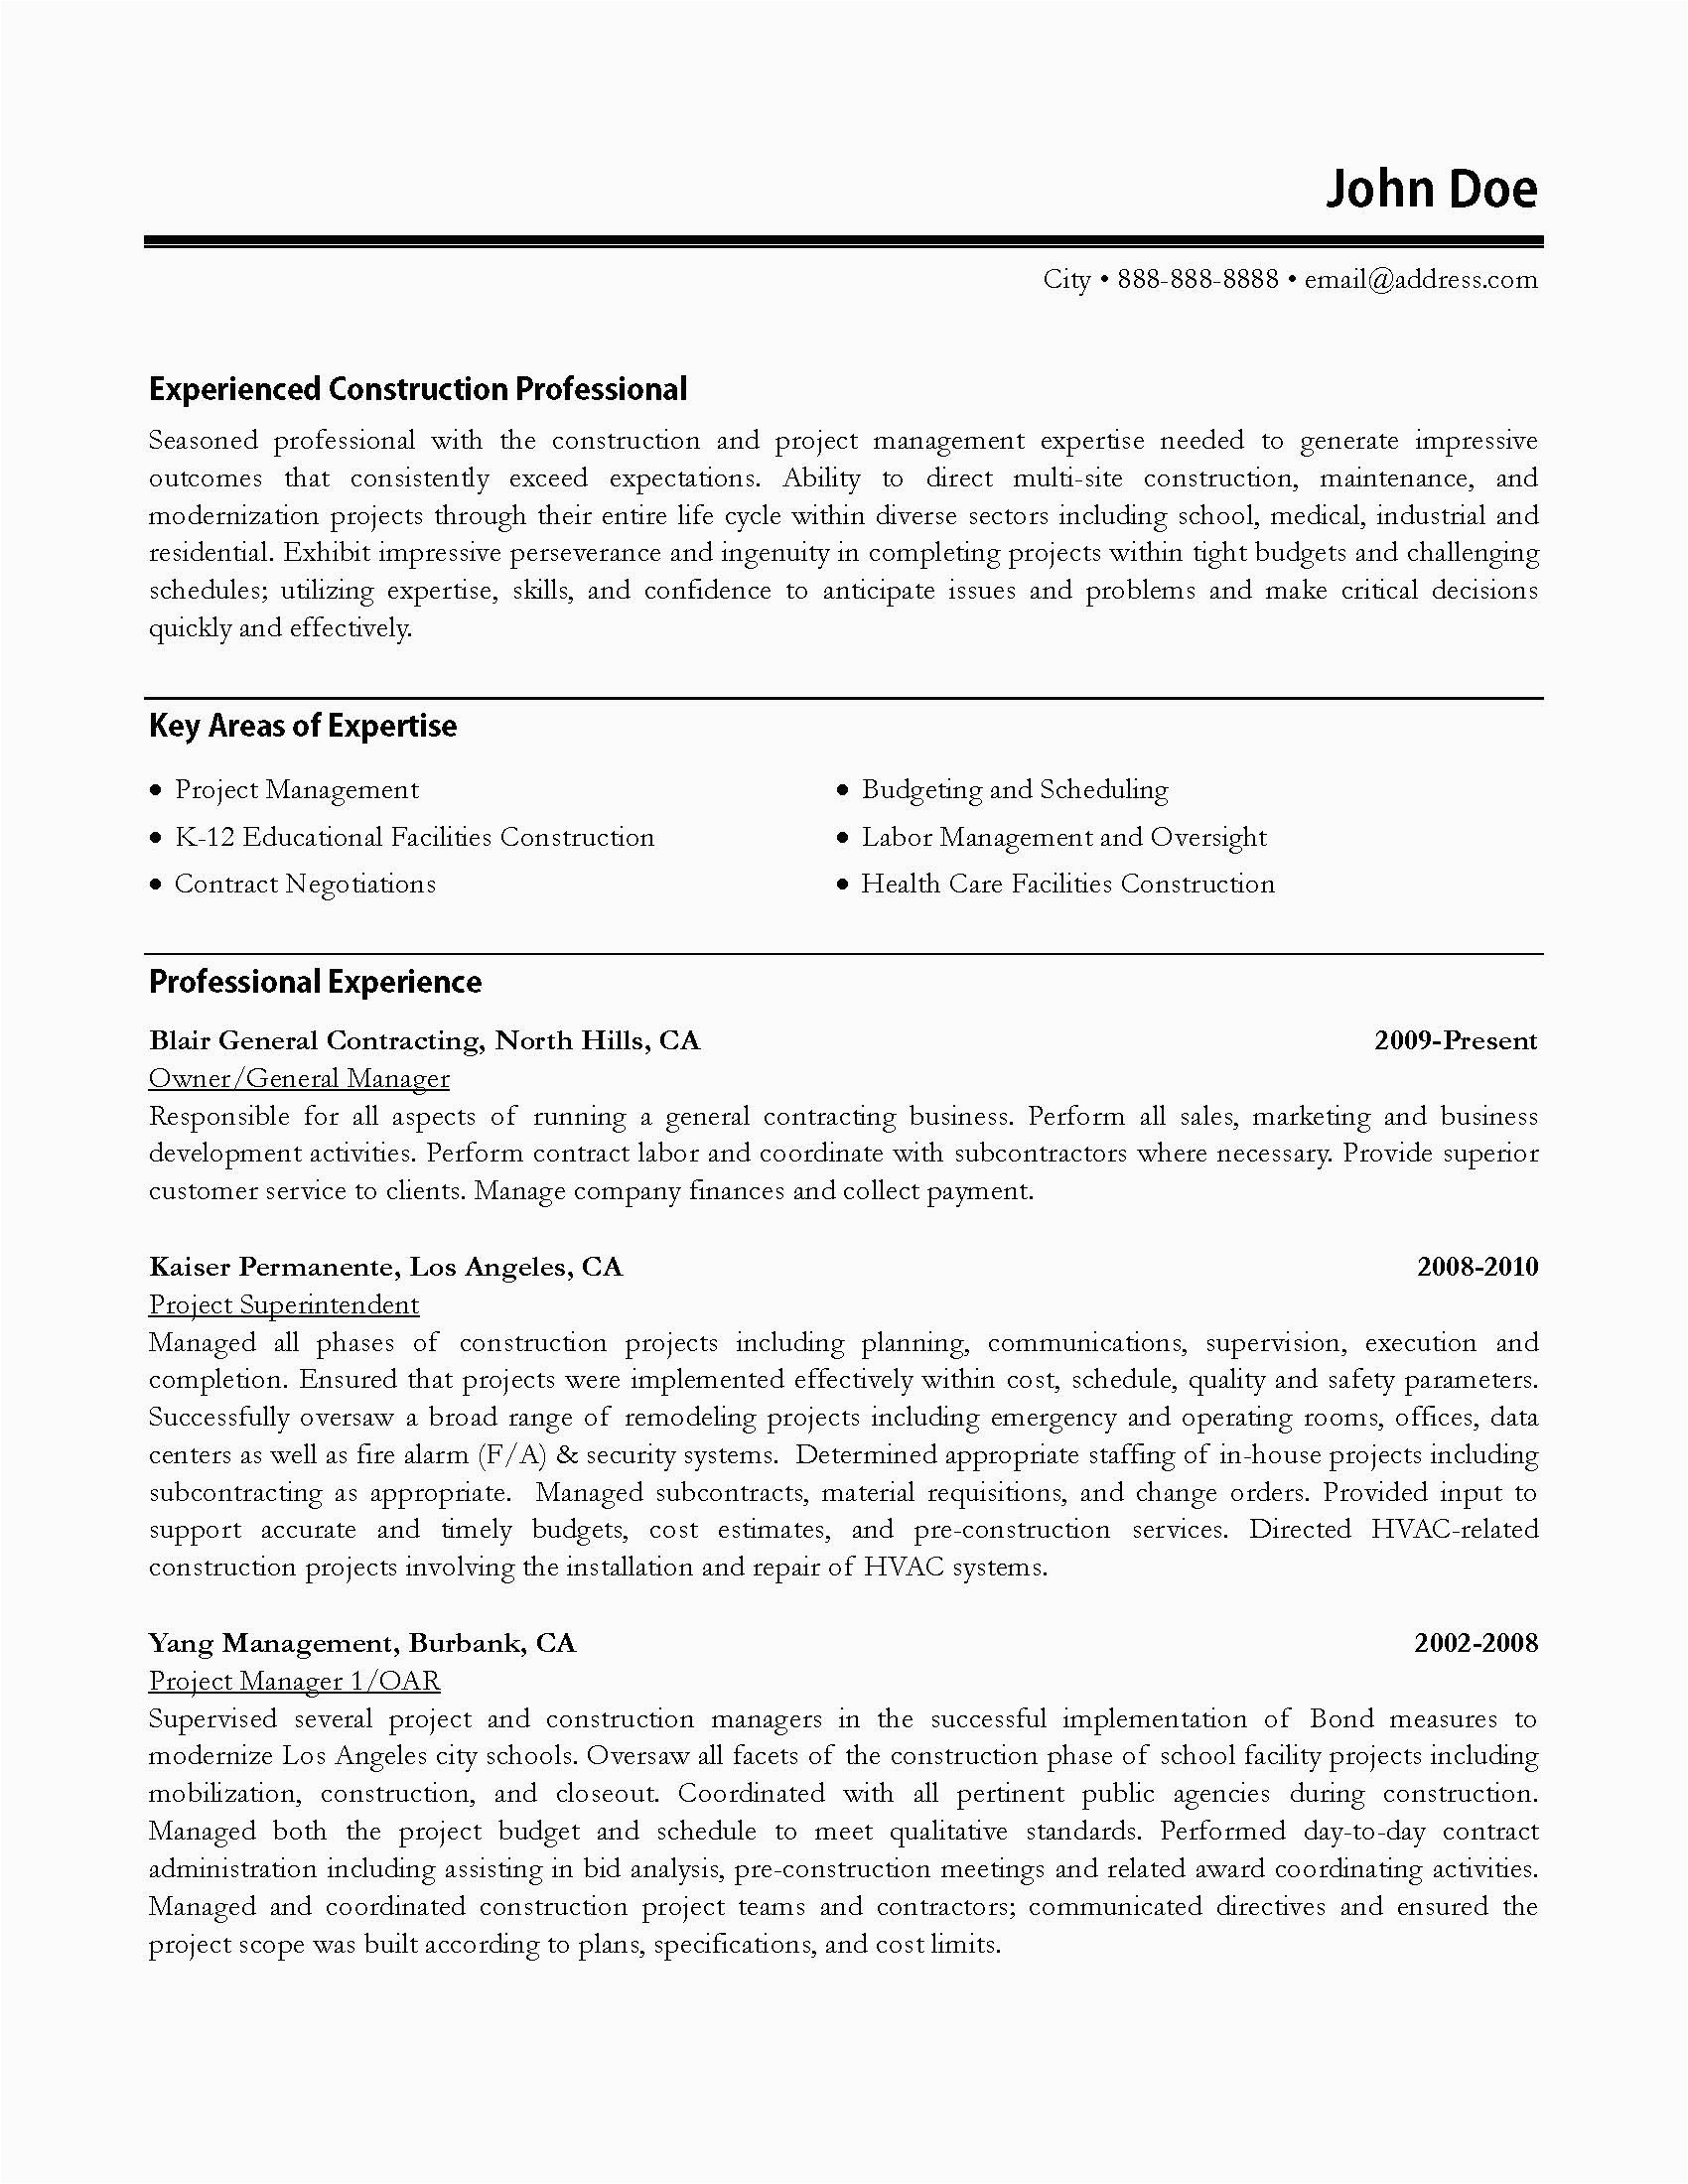 Resume Sample for Construction Project Manager Construction Project Manager Resume format Pdf format